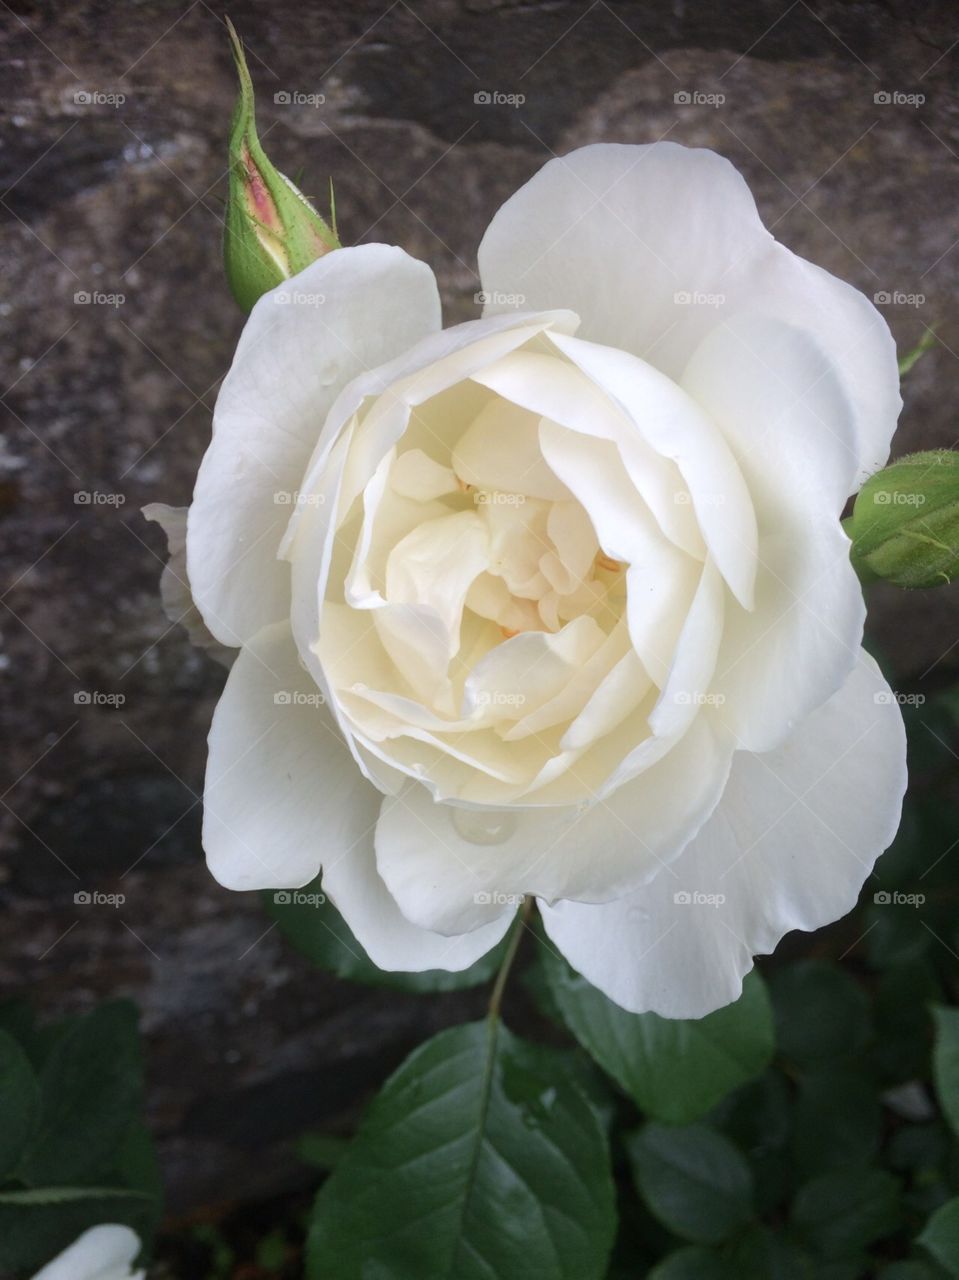 White rose just coming into bloom with its petals opening in a summer garden.